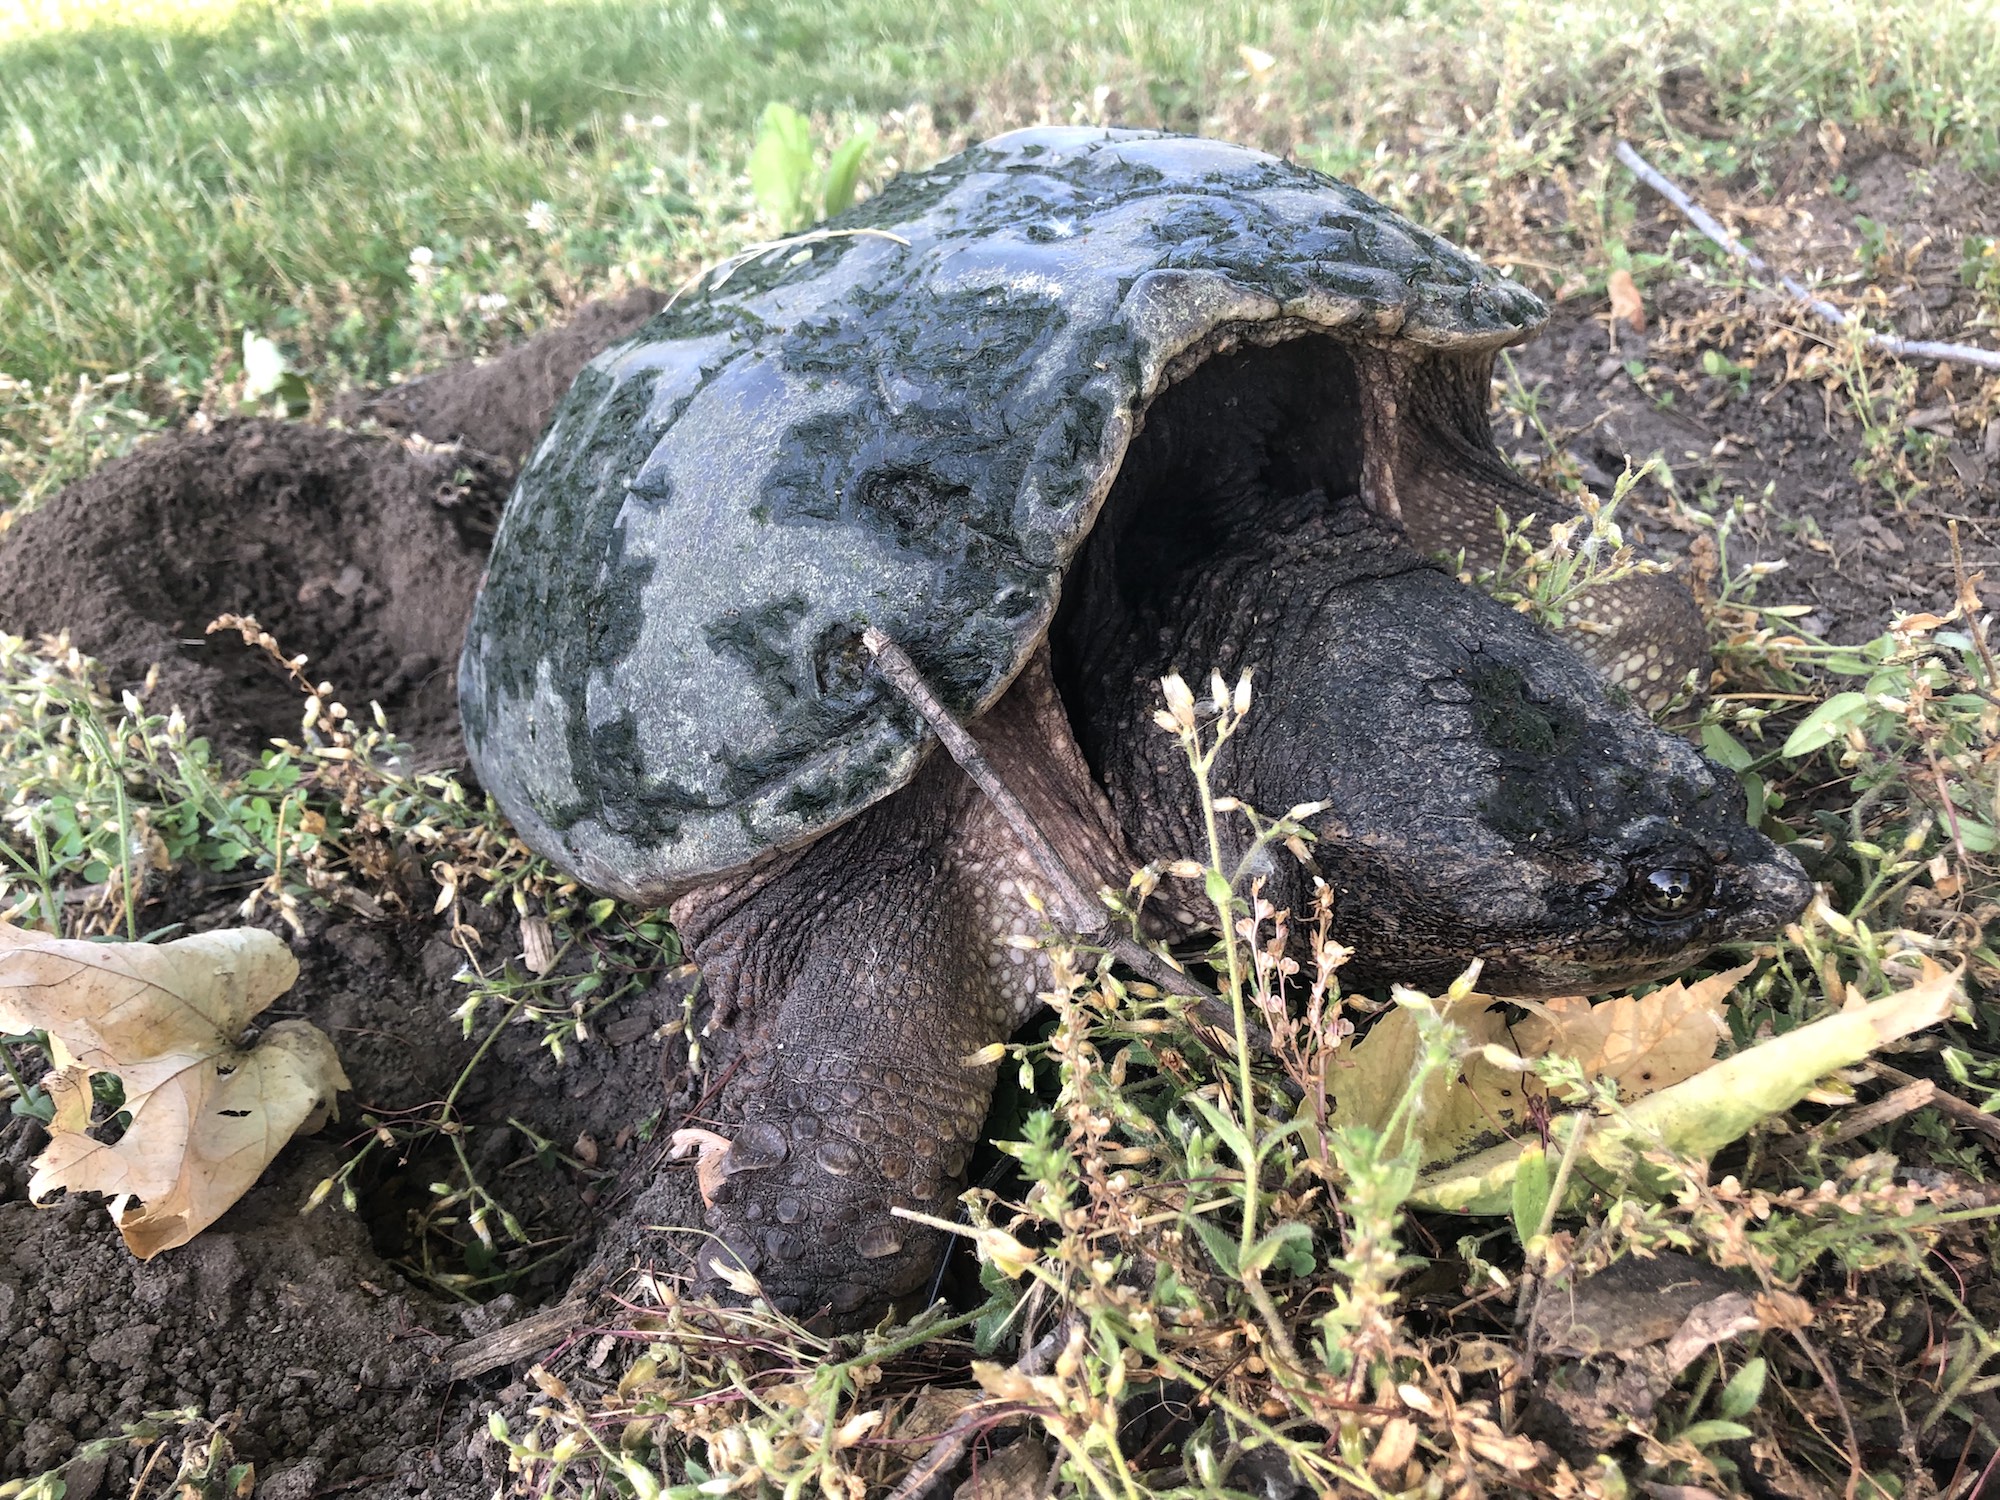 Snapping Turtle in E. Ray Stevens Pond and Aquatic Gardens on corner of Manitou Way and Nakoma Road in Madison, Wisconsin on June 6, 2021.